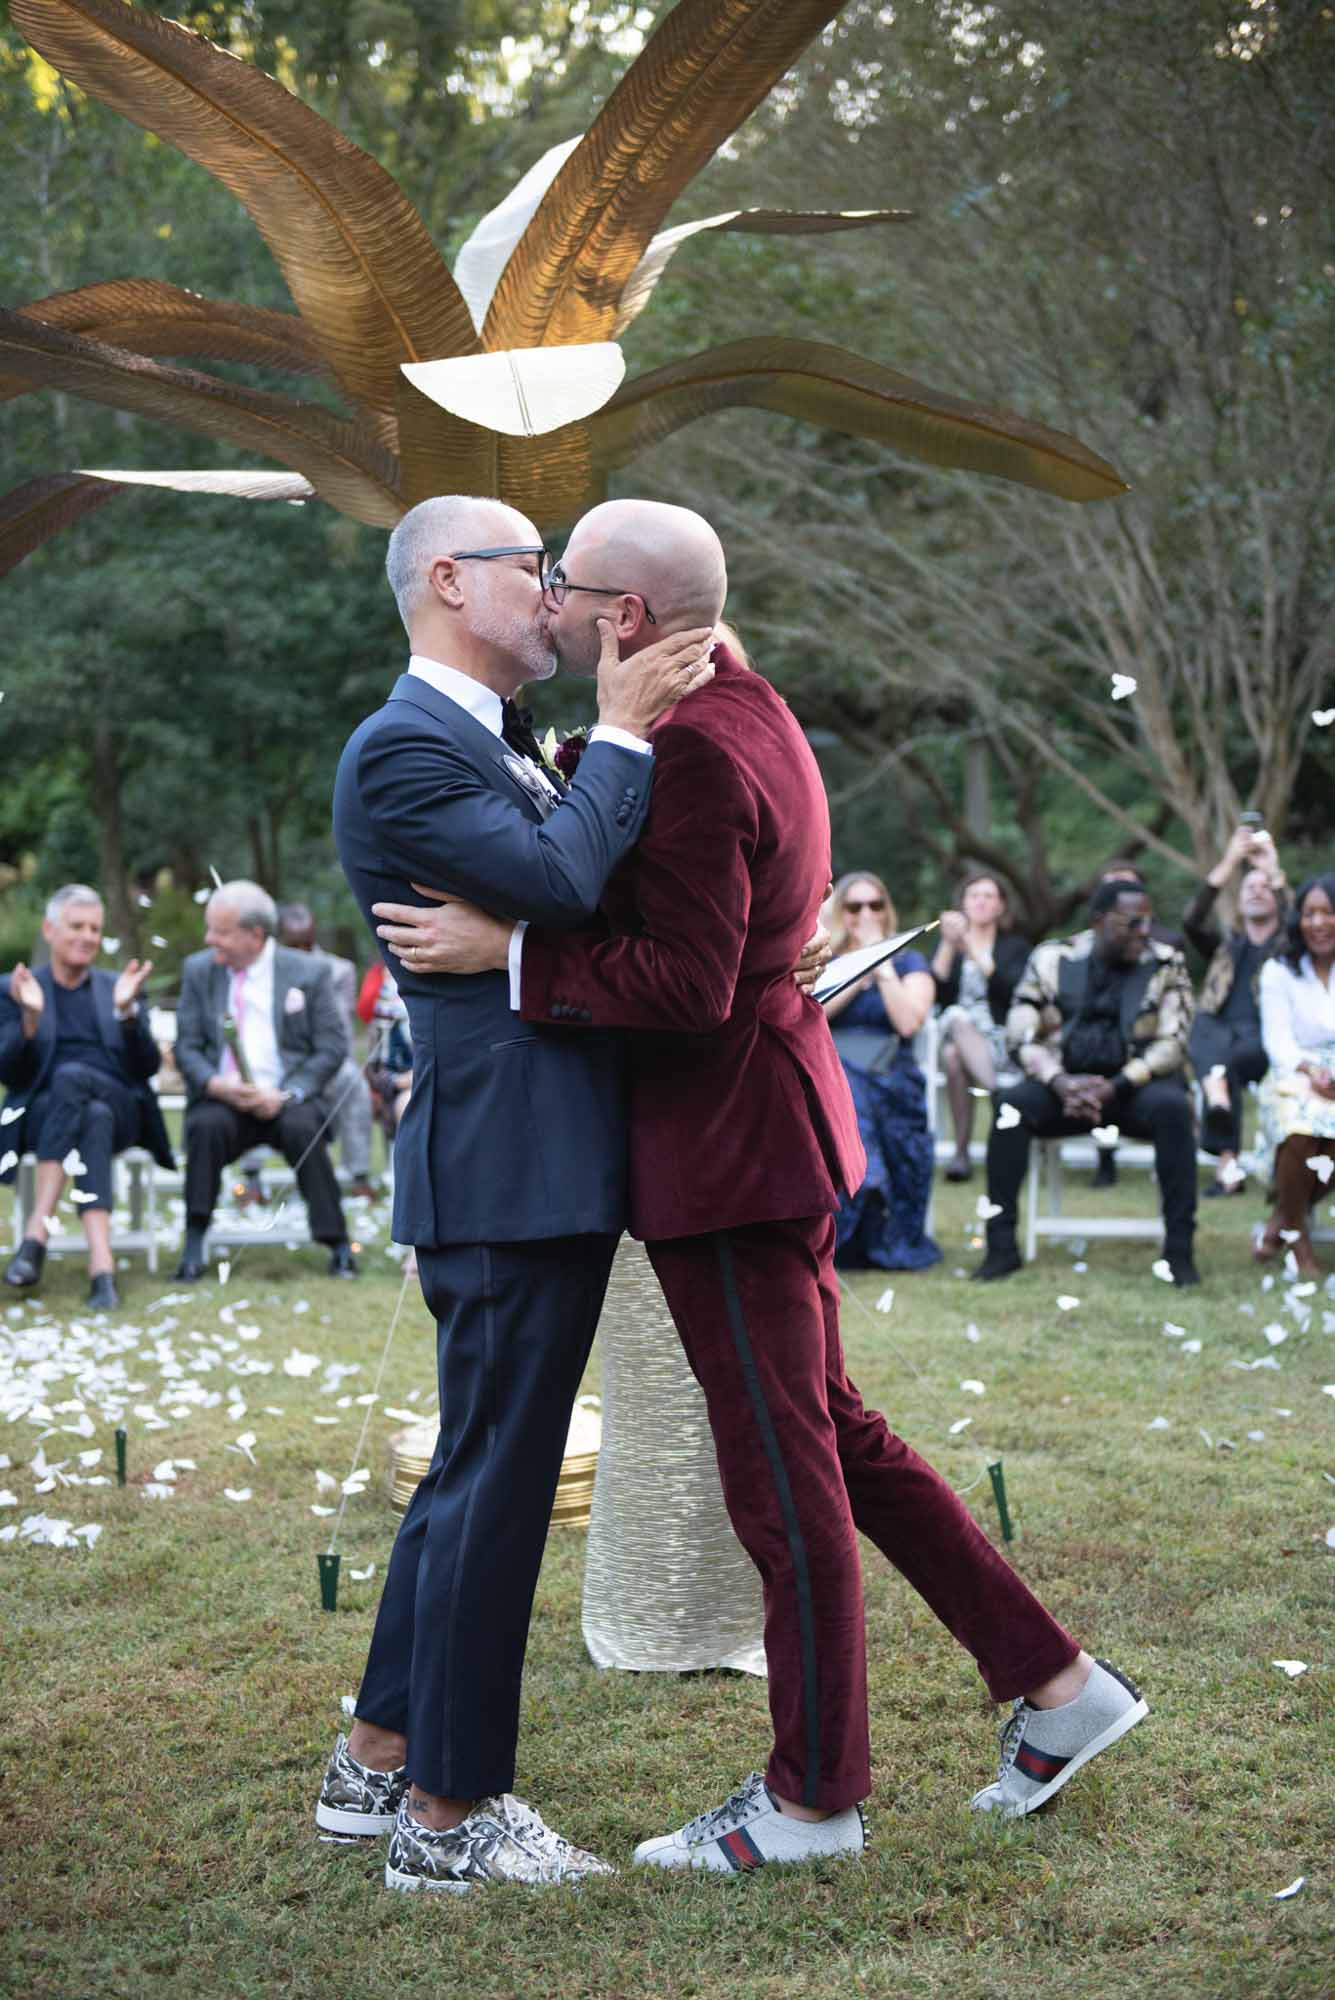 Glamorous garden wedding with bespoke tuxedos and spiral seating | Chucky Foto | Featured on Equally Wed, the leading LGBTQ+ wedding magazine